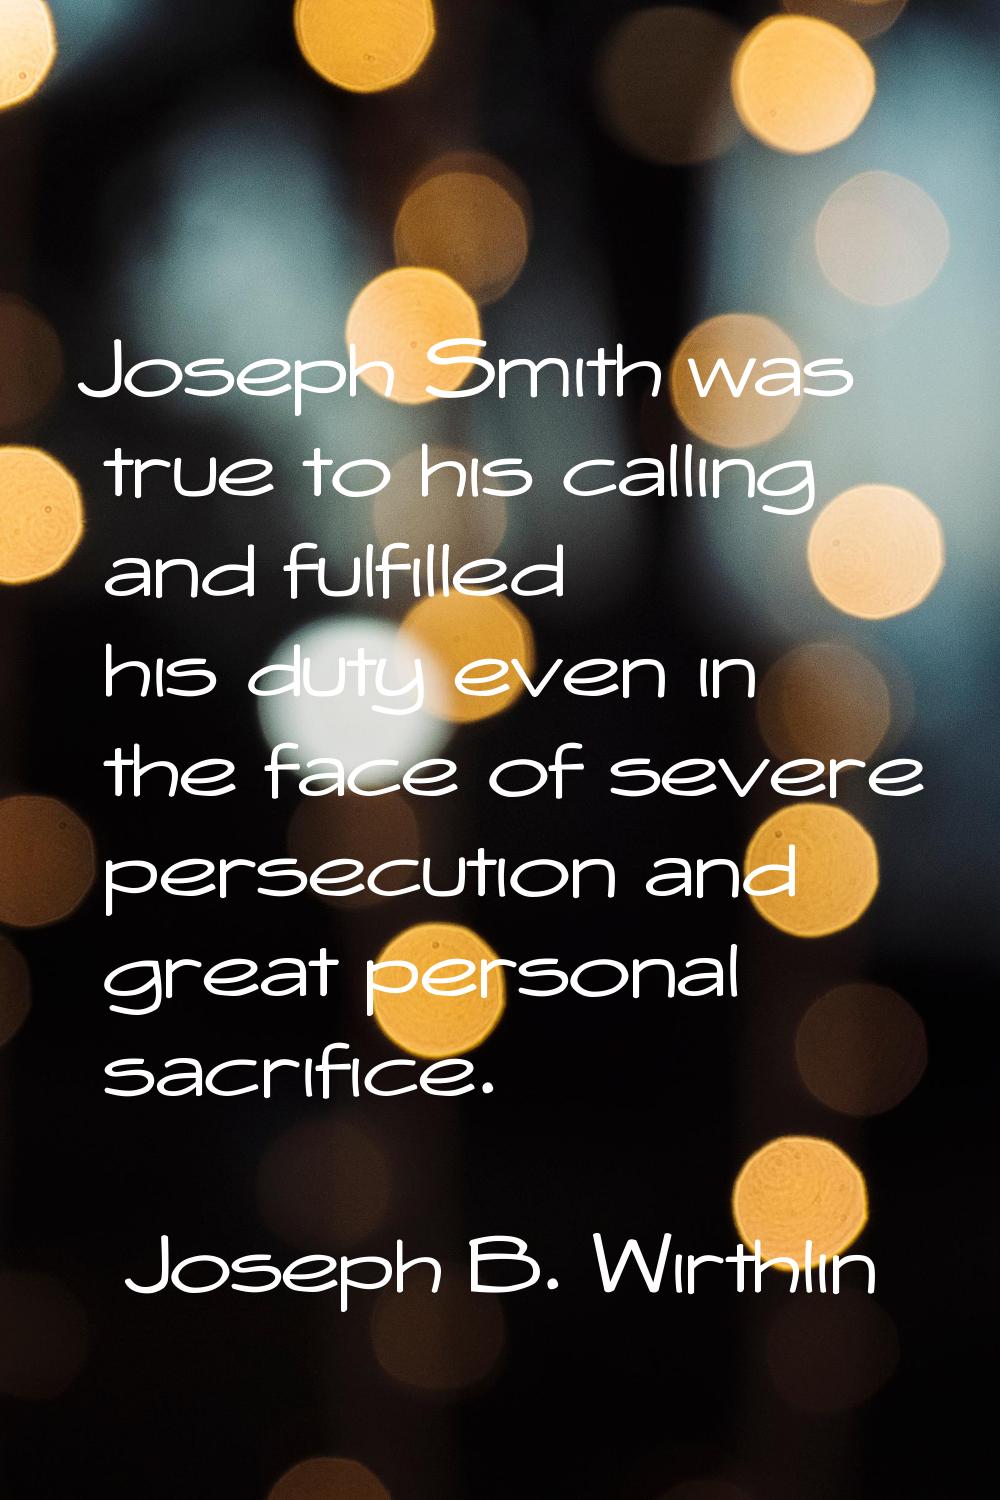 Joseph Smith was true to his calling and fulfilled his duty even in the face of severe persecution 